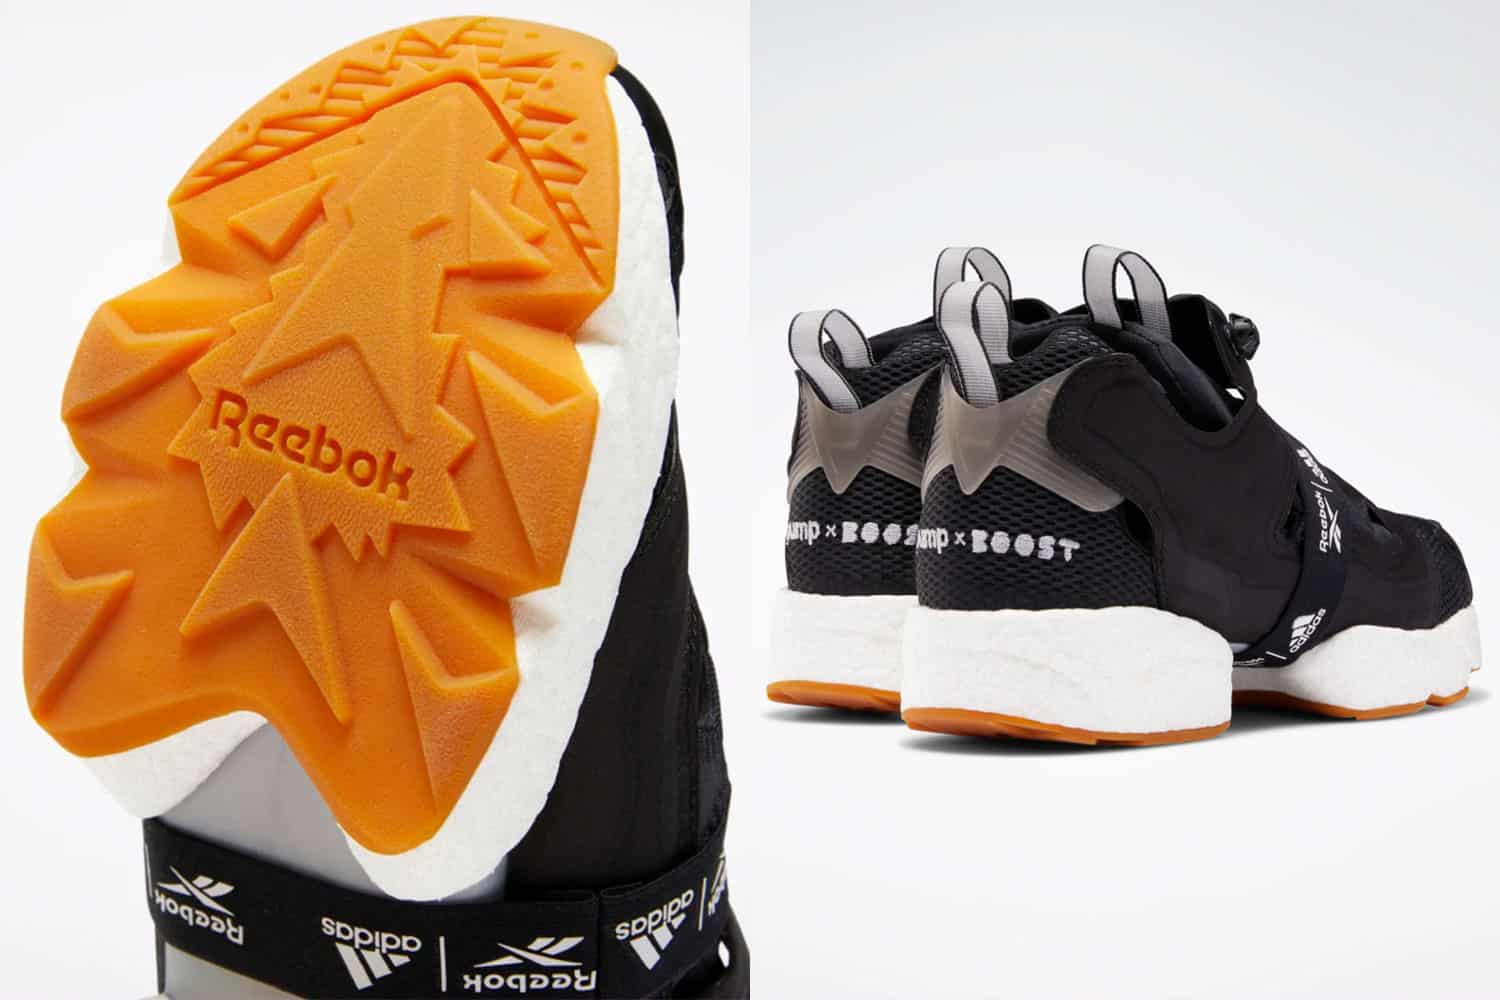 Reebok and Adidas Actually Collaborated With Each Other and the Results Are  Pretty Cool